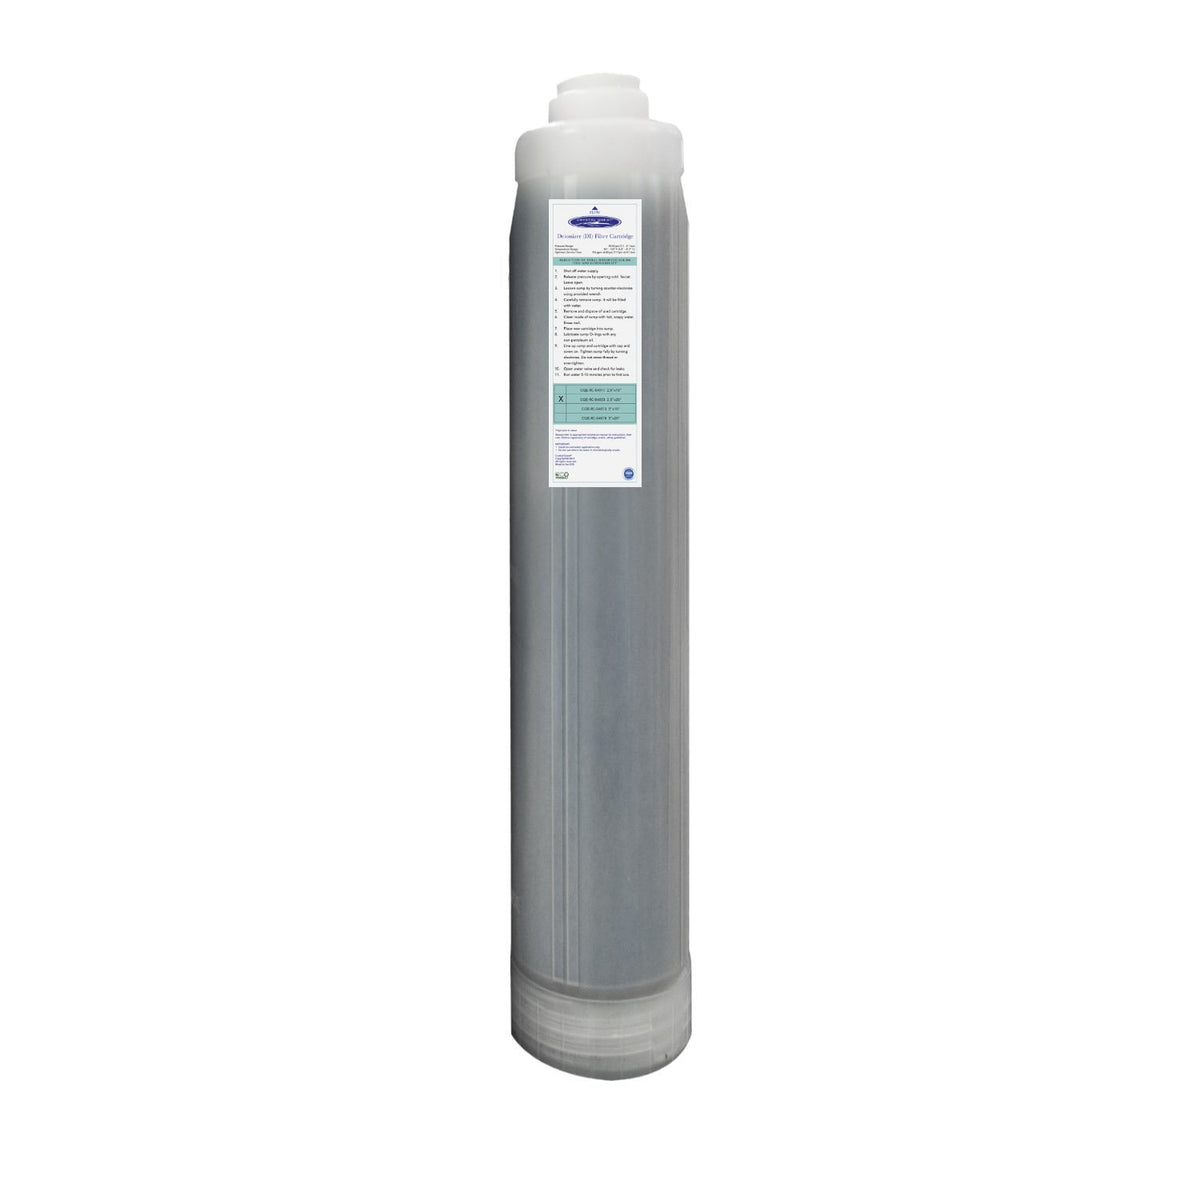 2-7/8" x 20" Ultra High Purity Demineralizing (DI) Cartridge for TDS Reduction - Water Filter Cartridges - Crystal Quest Water Filters